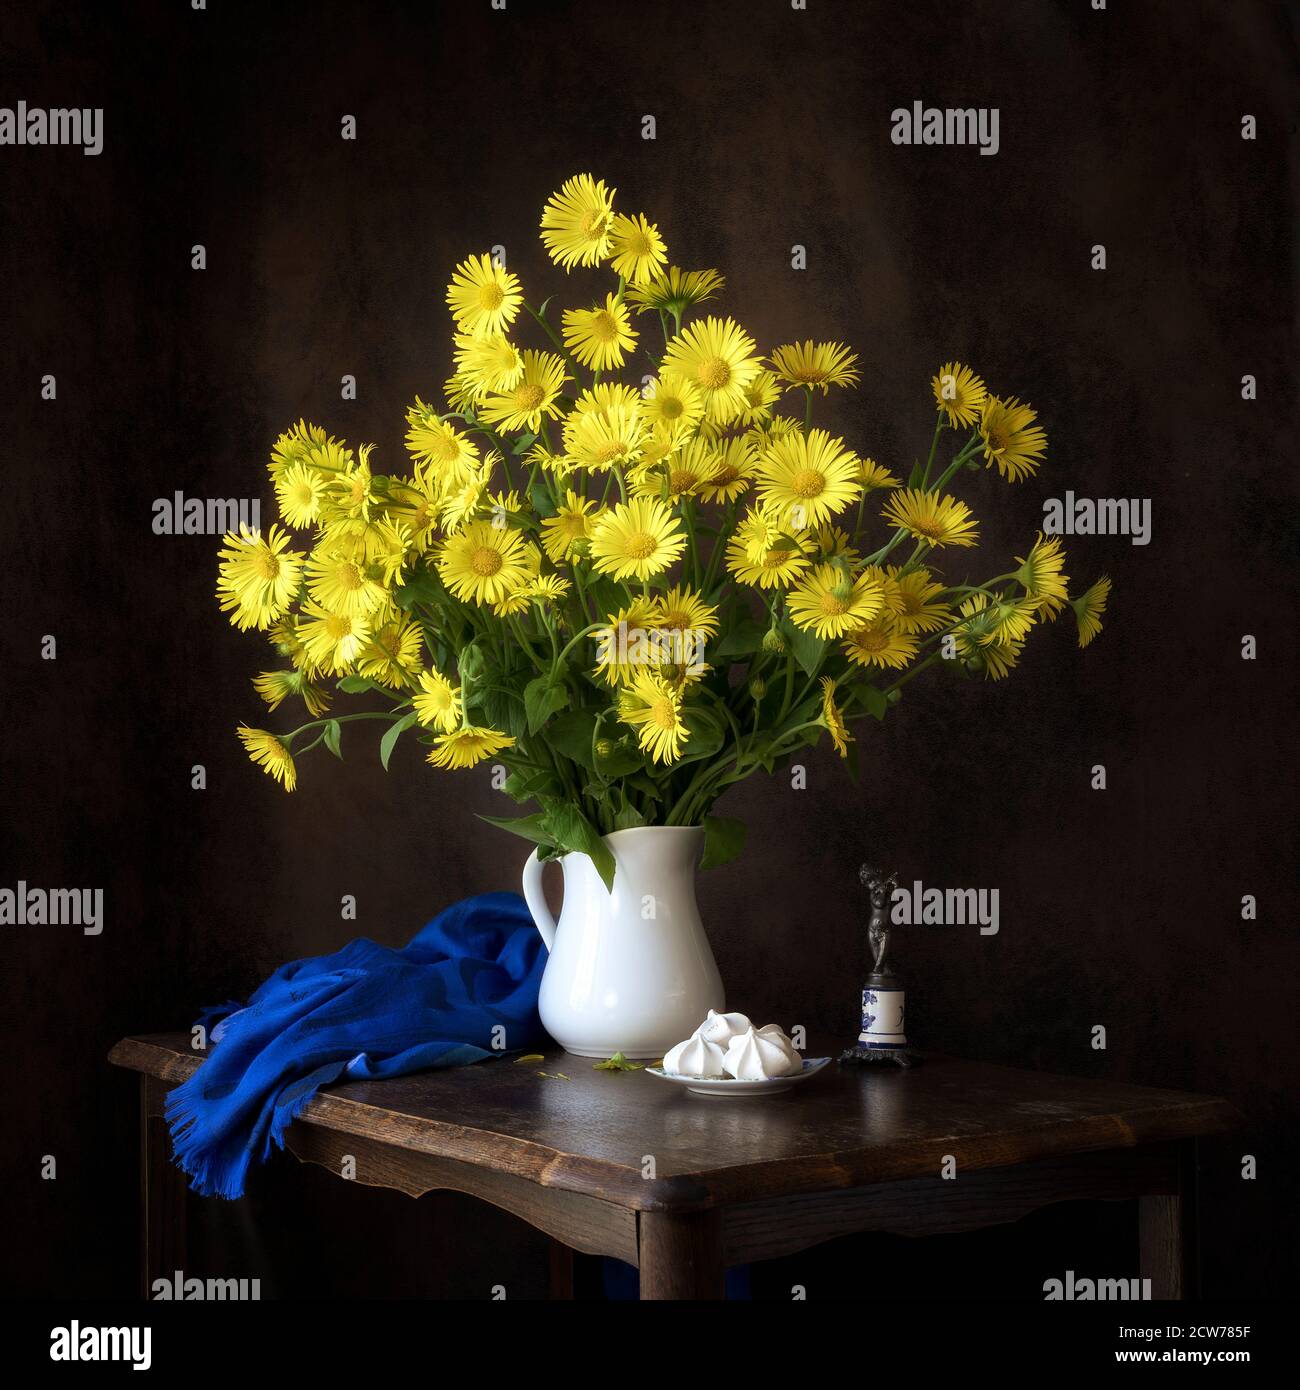 Spring still life yellow daisy study with blue scarf and white jug Stock Photo